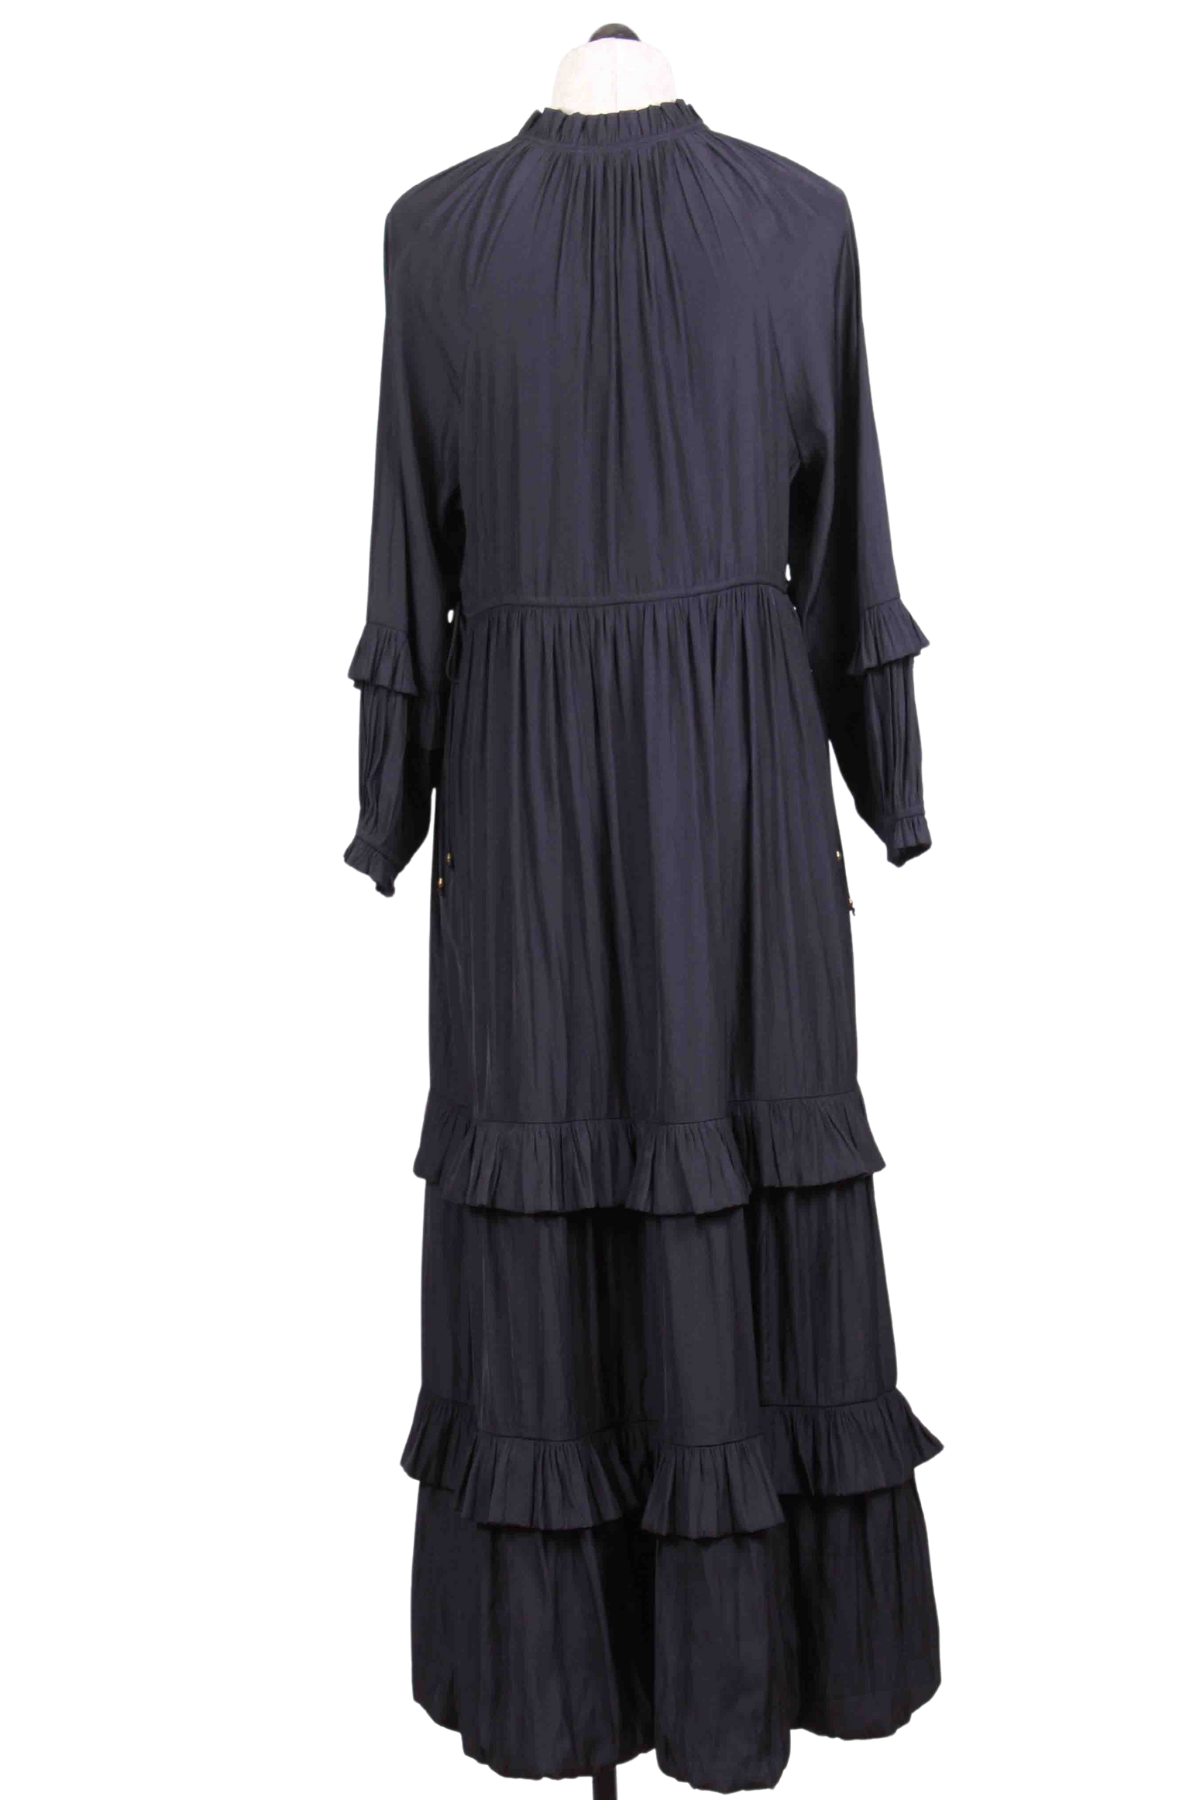 back view of Midnight Cove Maxi Dress by Marie Oliver